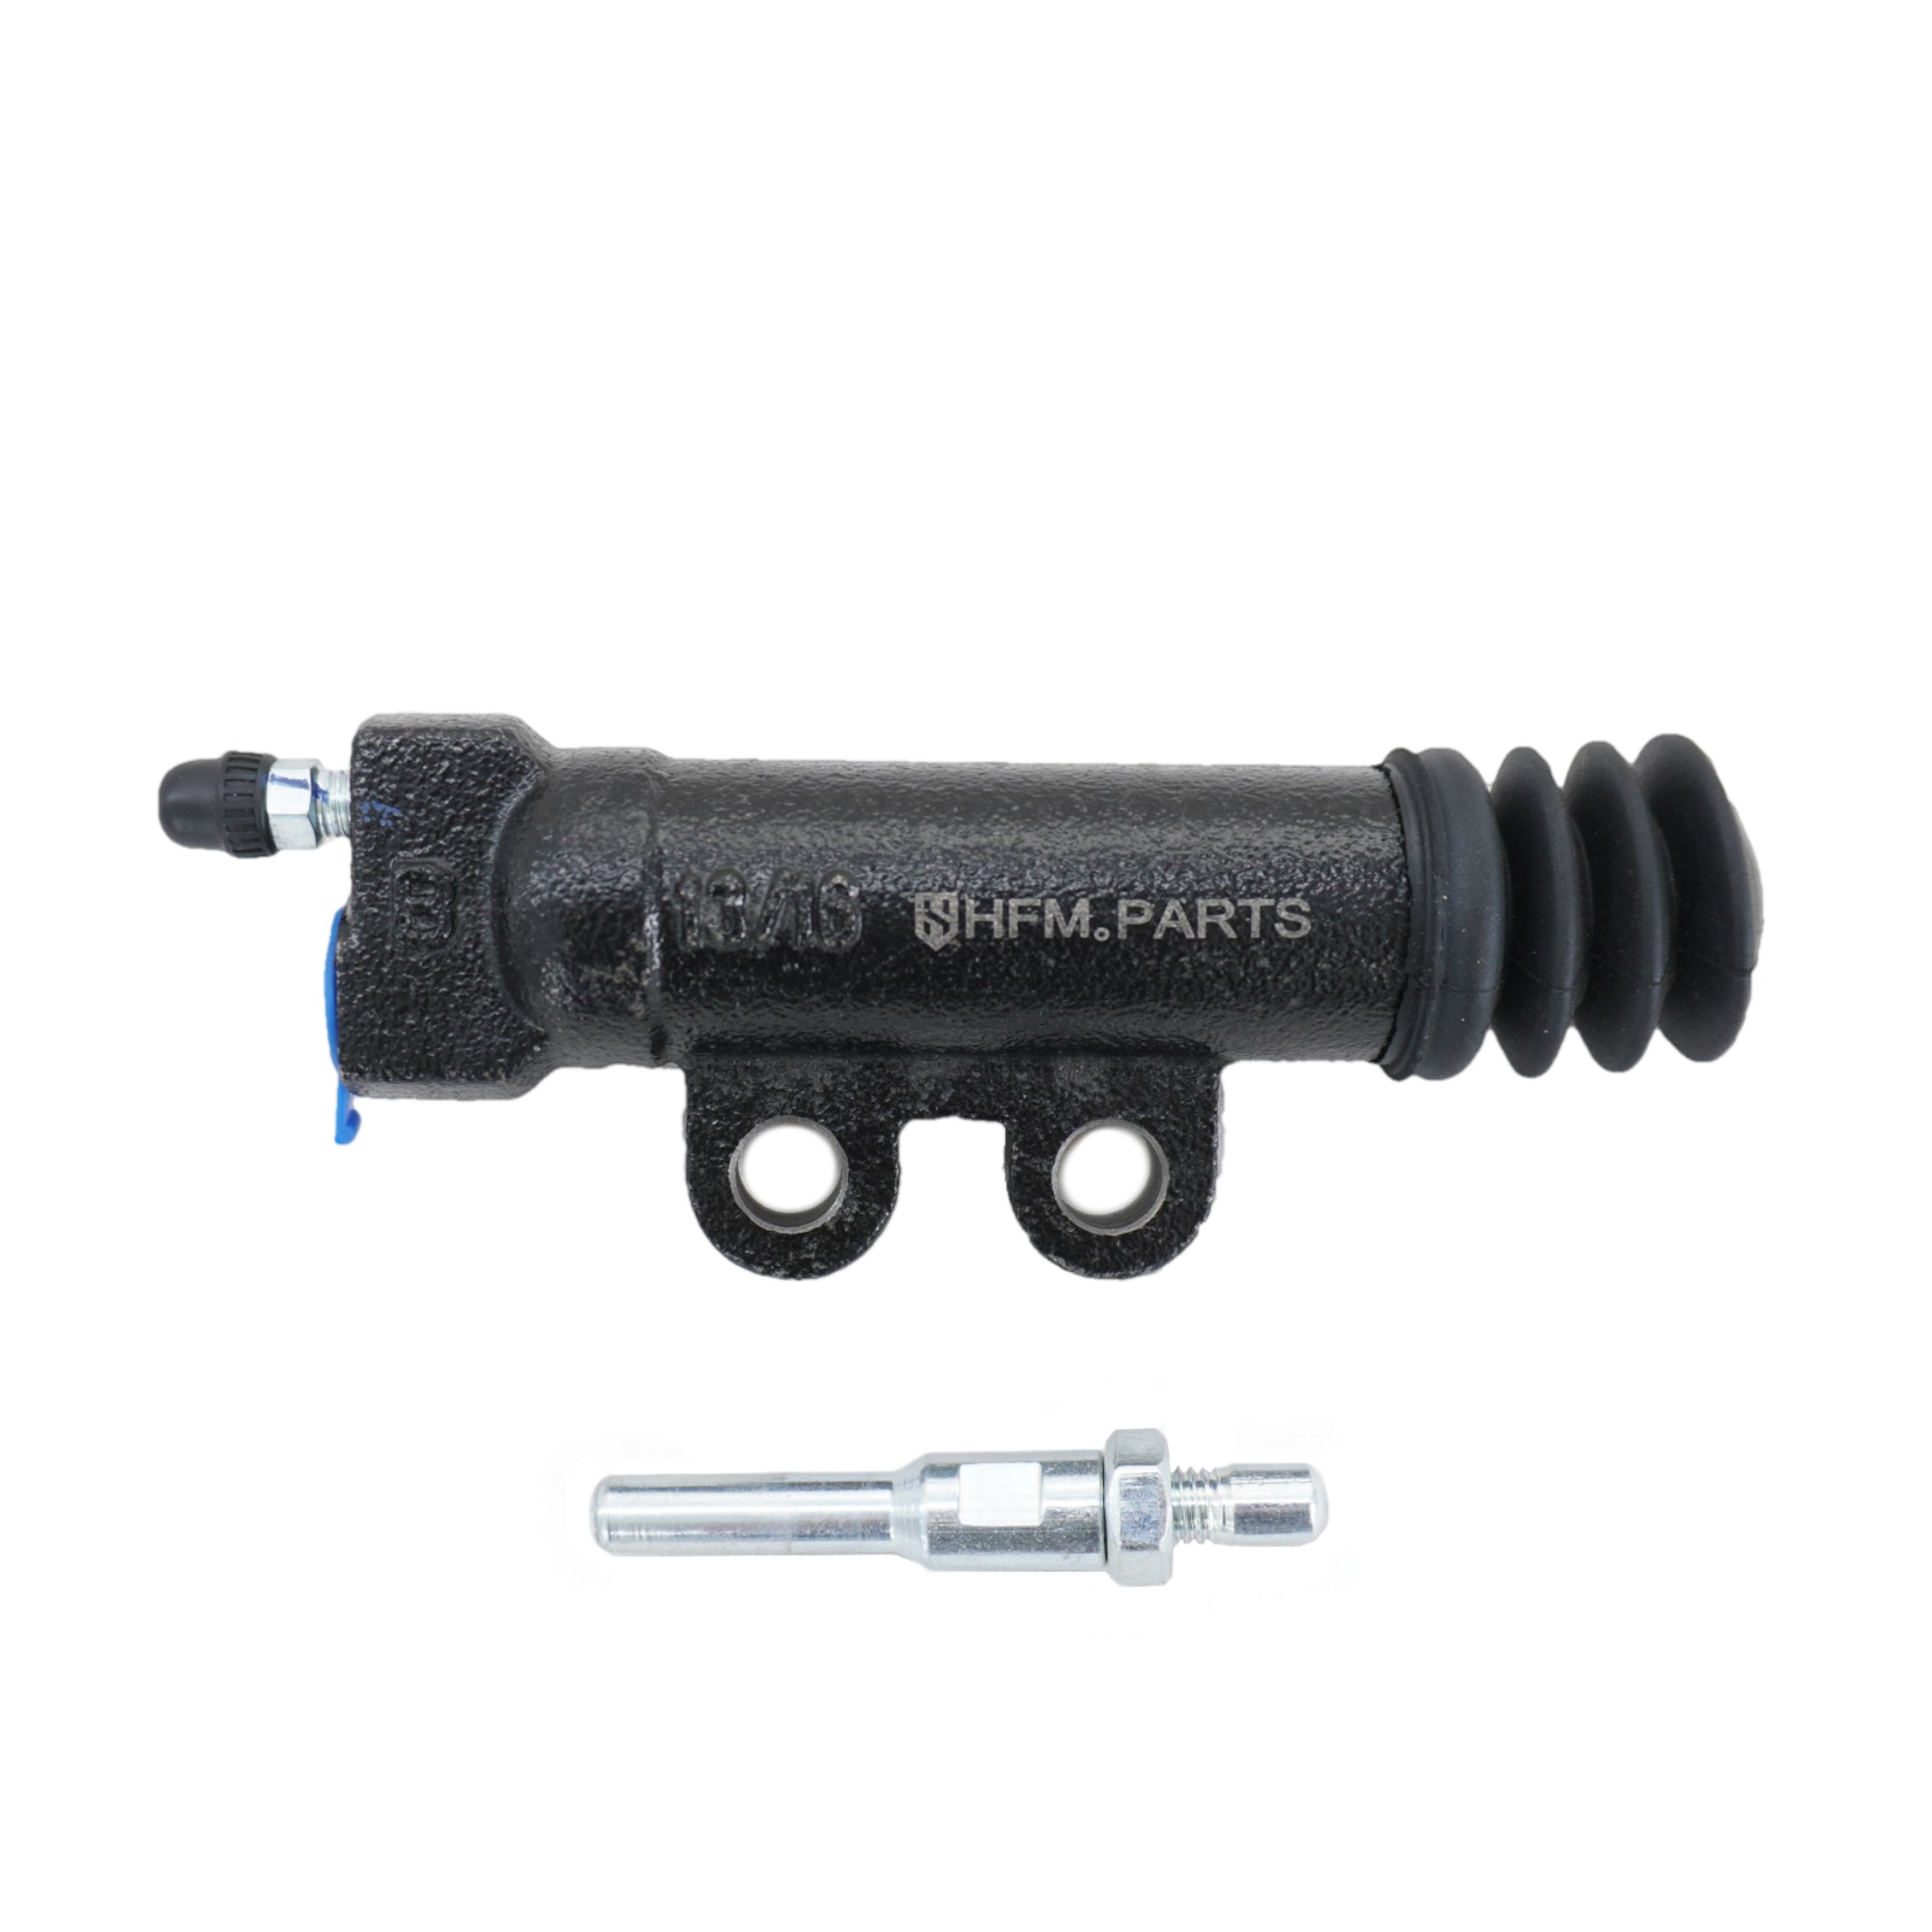 HFM.Parts Big Bore Clutch Slave Cylinder (pull-type)